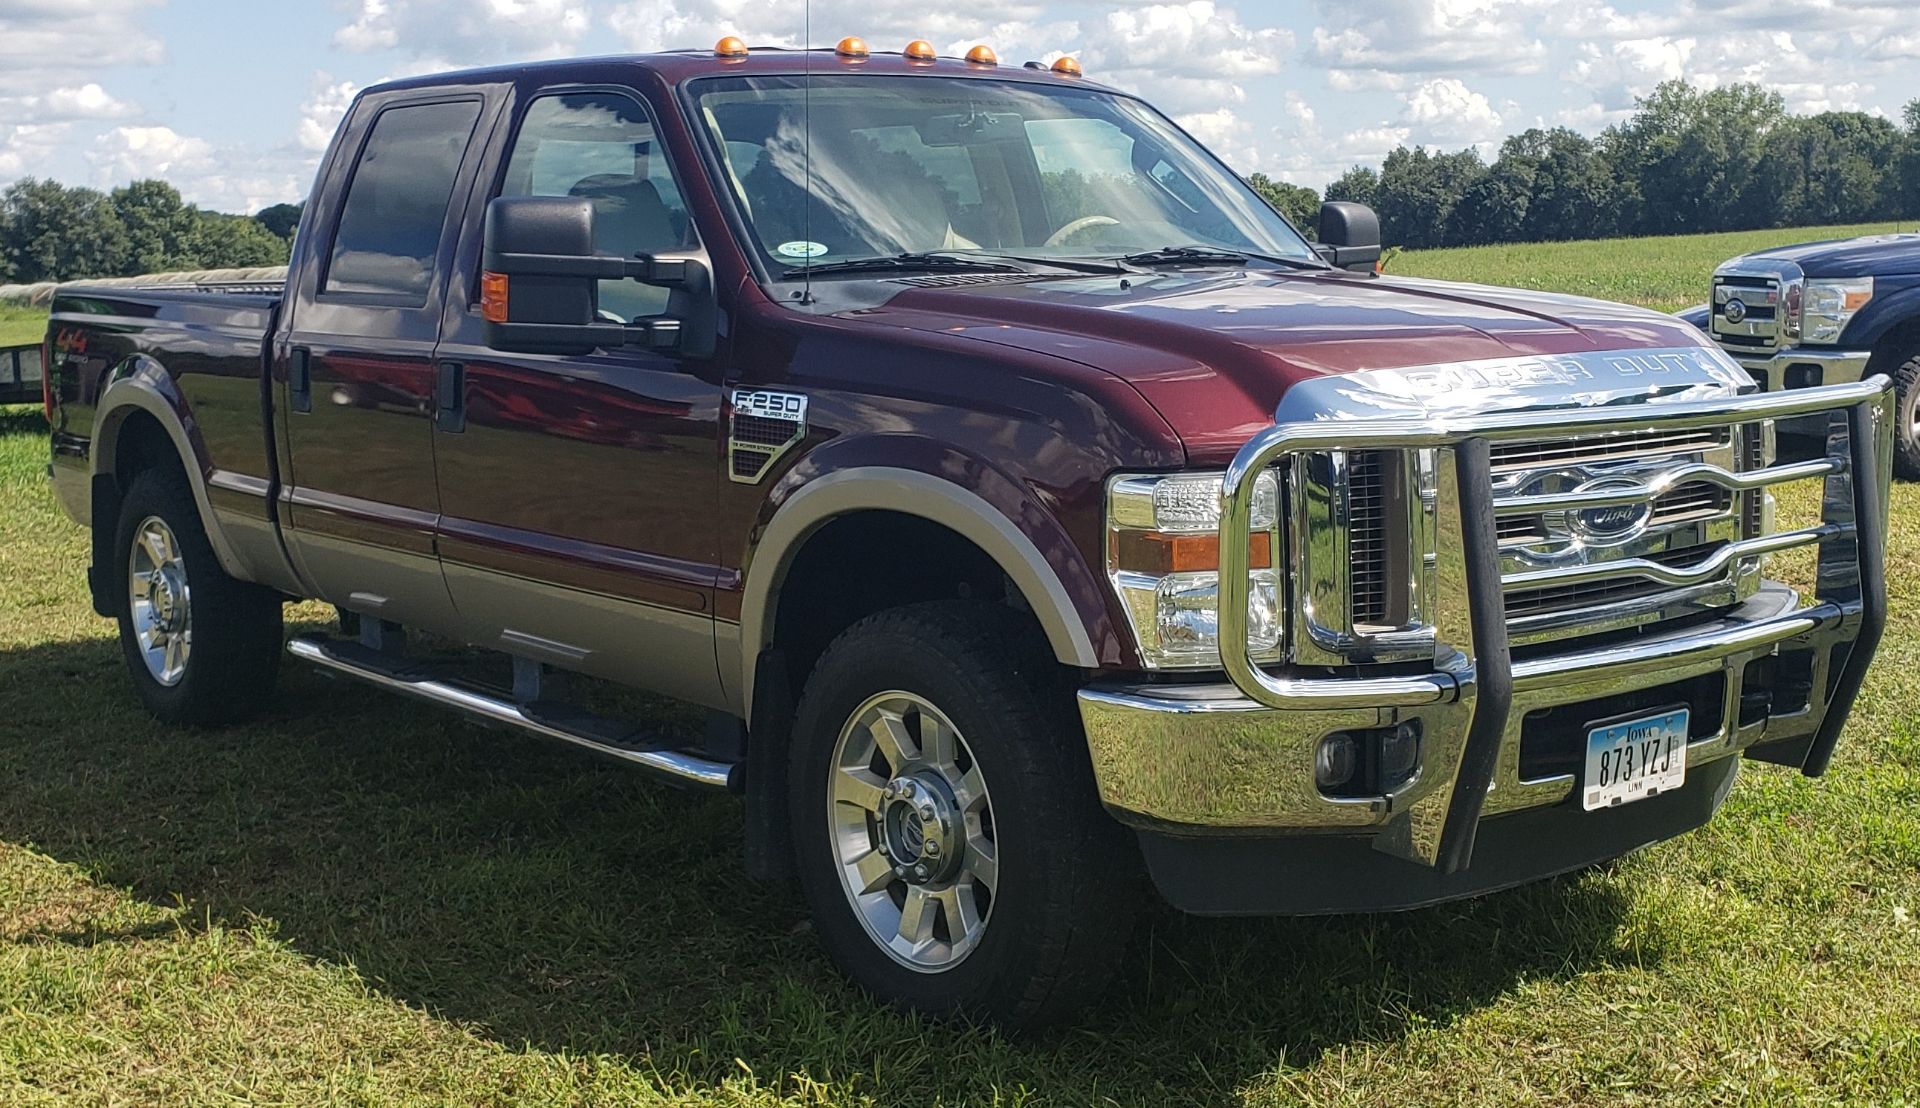 2009 Ford F250 - Image 6 of 6